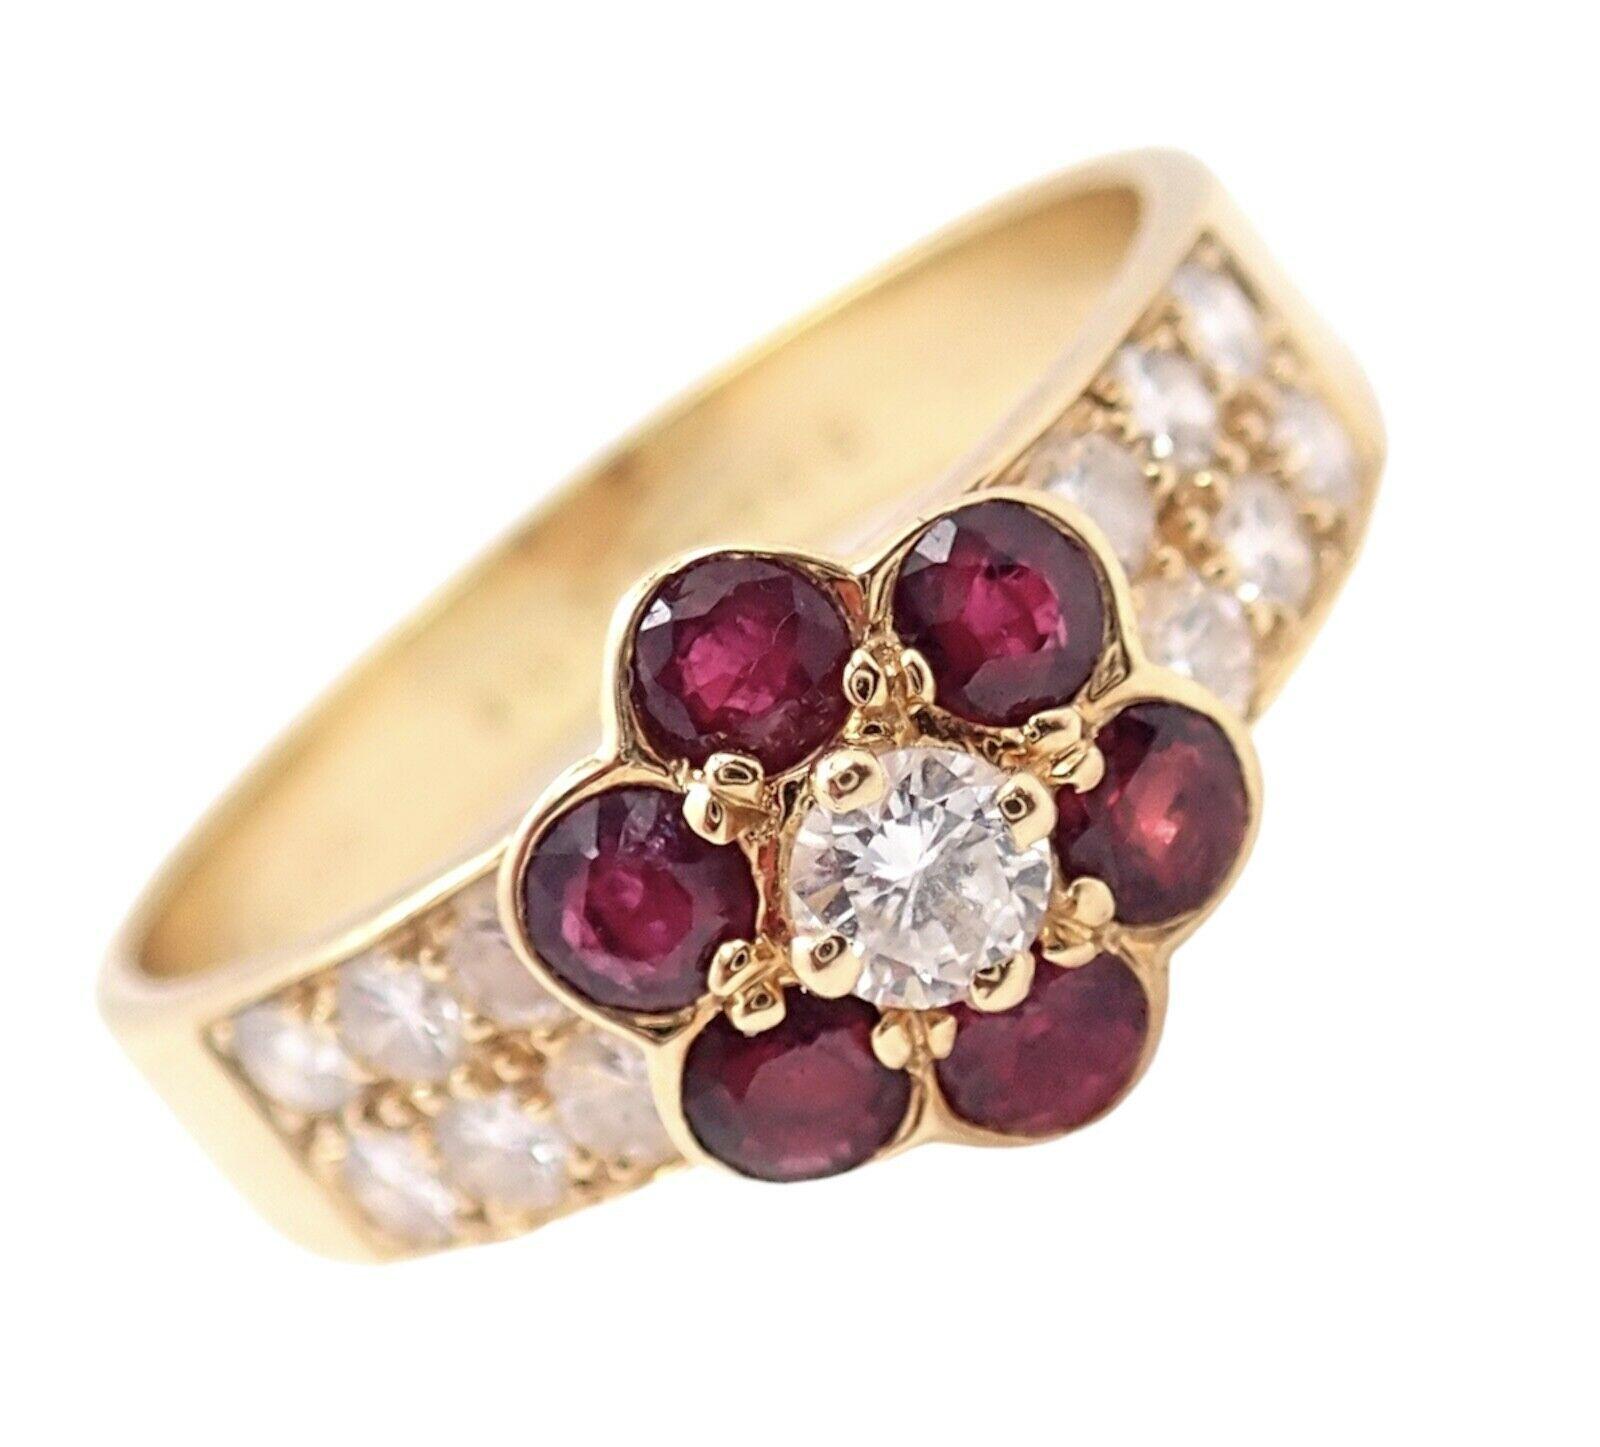 18k Yellow Gold Diamond & Ruby Fleurette Flower Ring by Van Cleef & Arpels. 
With 13 round brilliant cut diamond VS1 clarity, G color total weight approx. .53ct
6 round rubies total weight approx. .70ct

Details:
Size: 8
Width: 9mm
Weight: 4